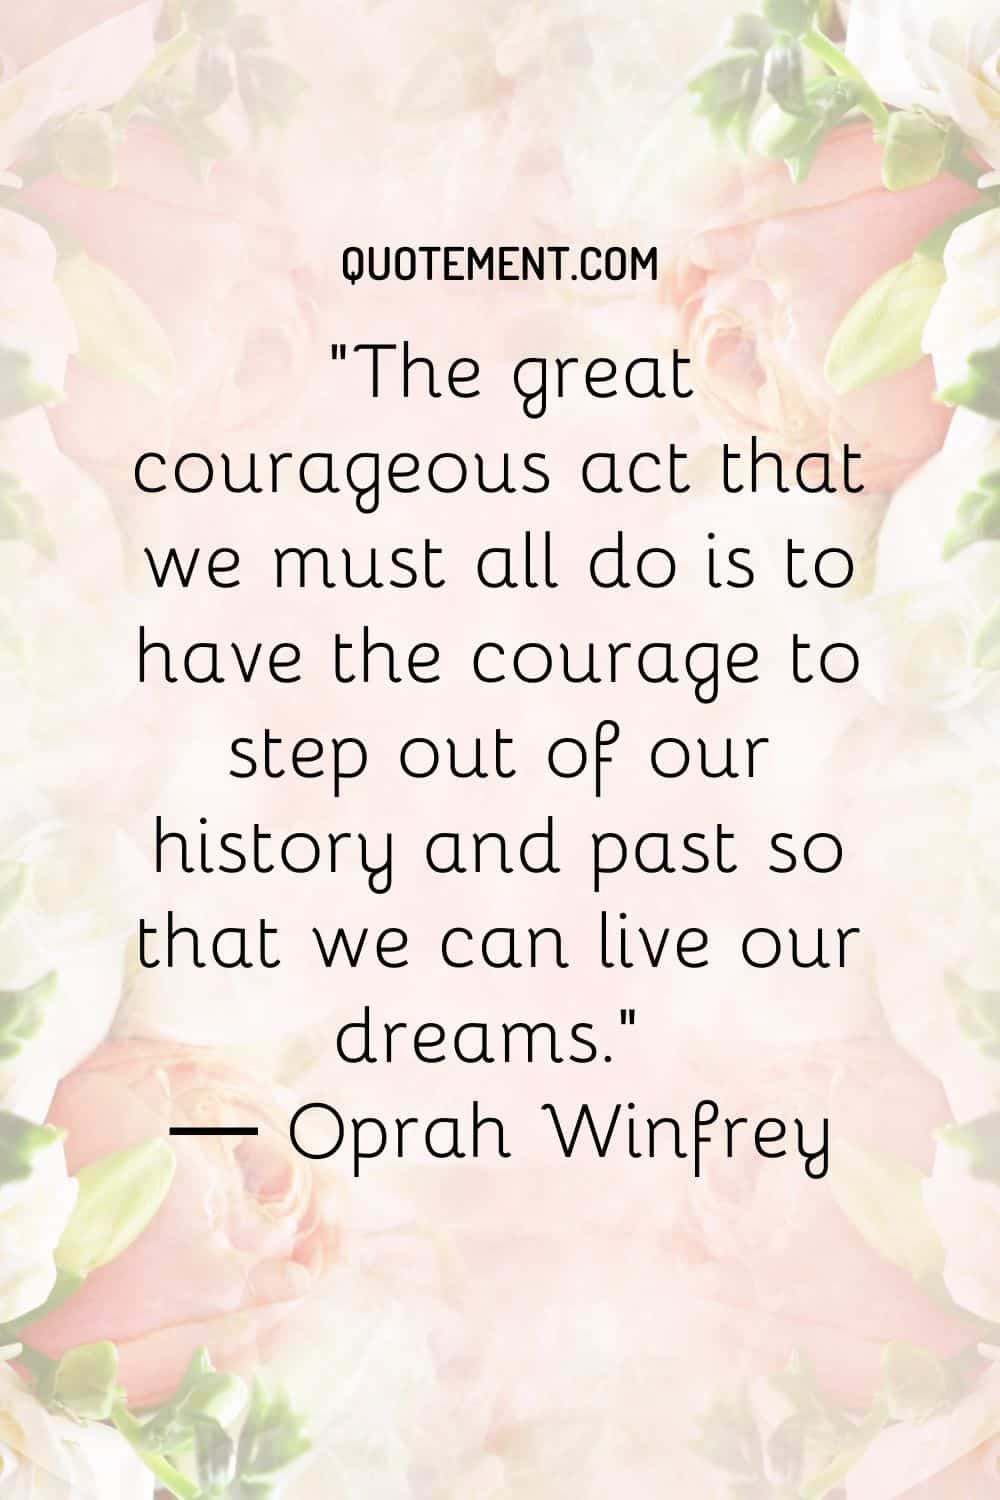 The great courageous act that we must all do is to have the courage to step out of our history and past so that we can live our dreams